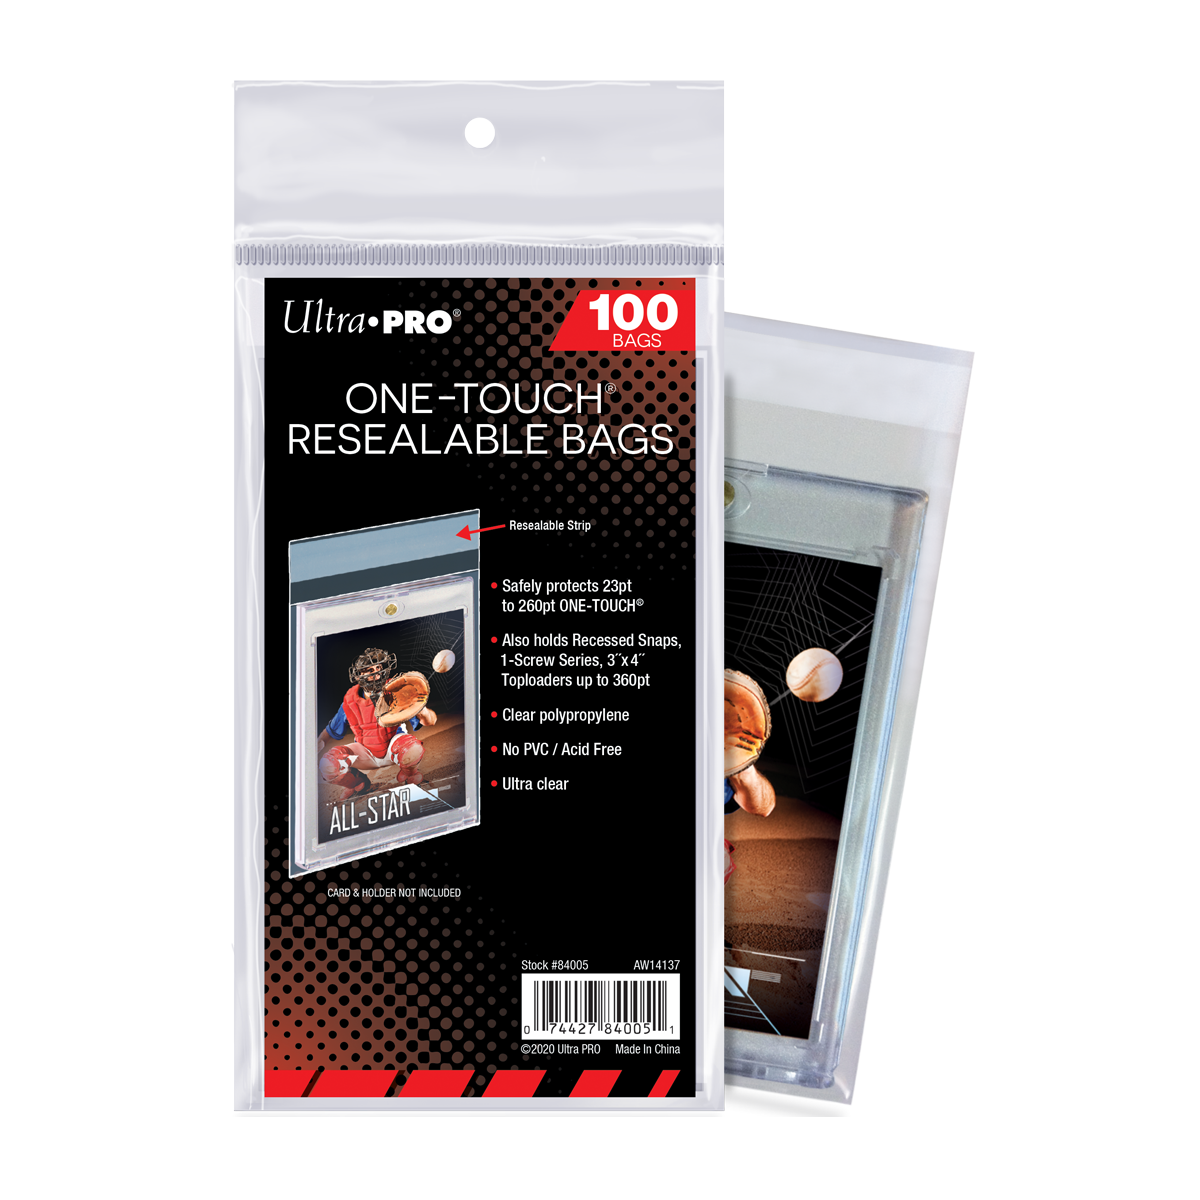 ONE-TOUCH Resealable Bags, Fits up to 260PT (100ct) | Ultra PRO International